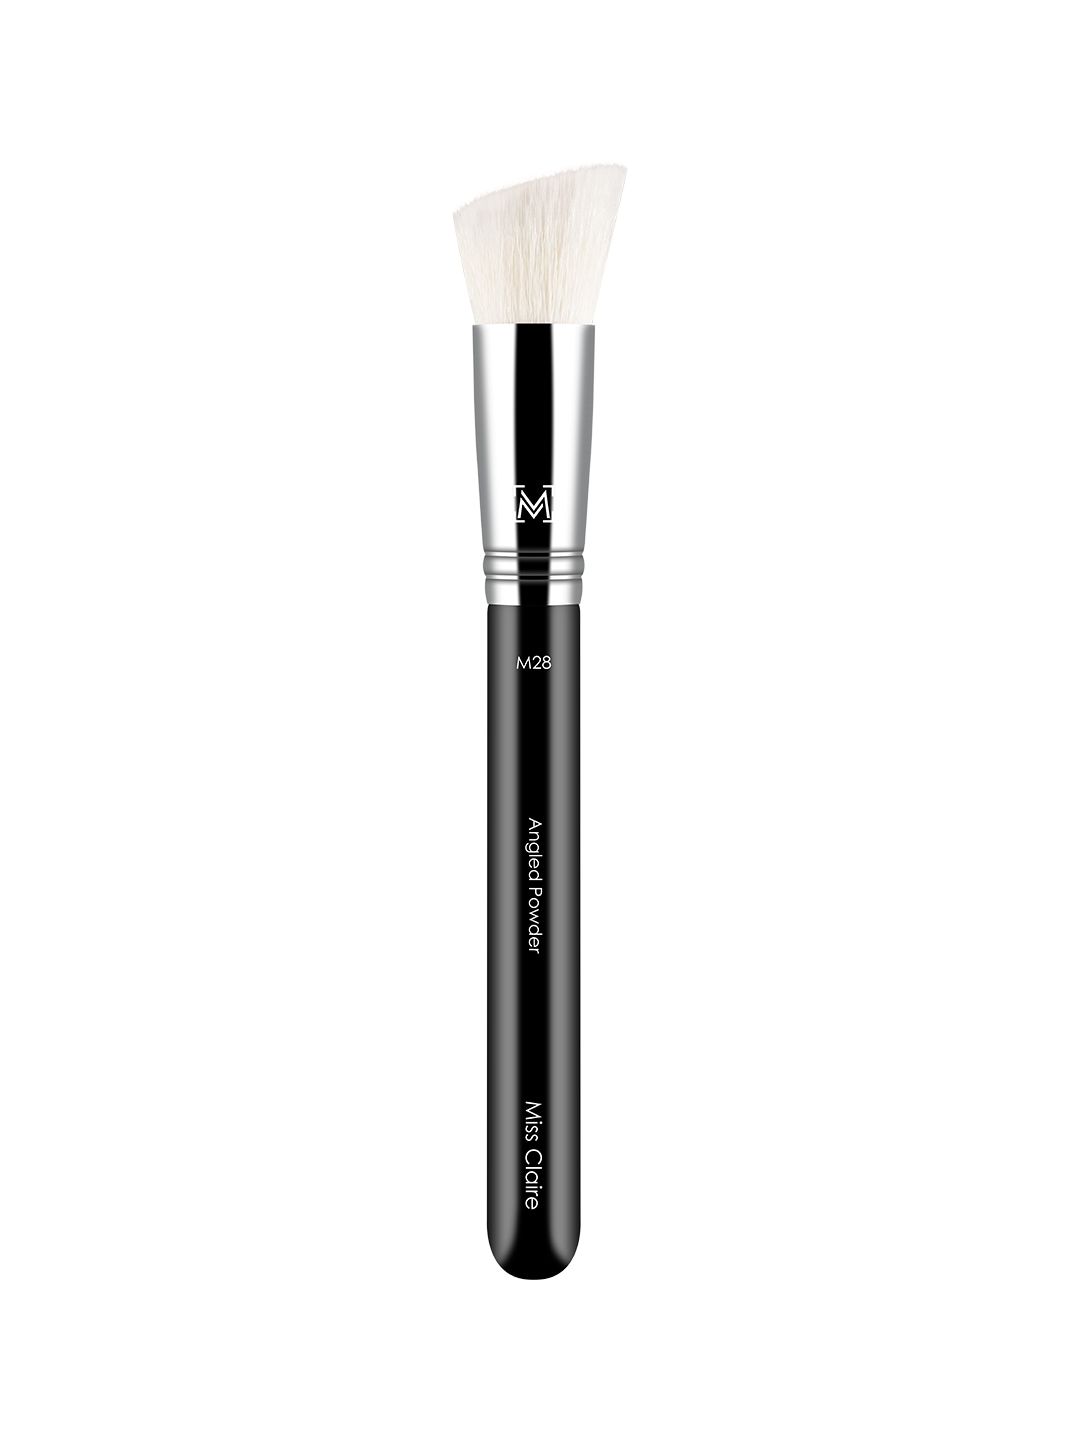 Miss Claire Chrome Angled Powder Brush - M28 Black & Silver-Toned Price in India